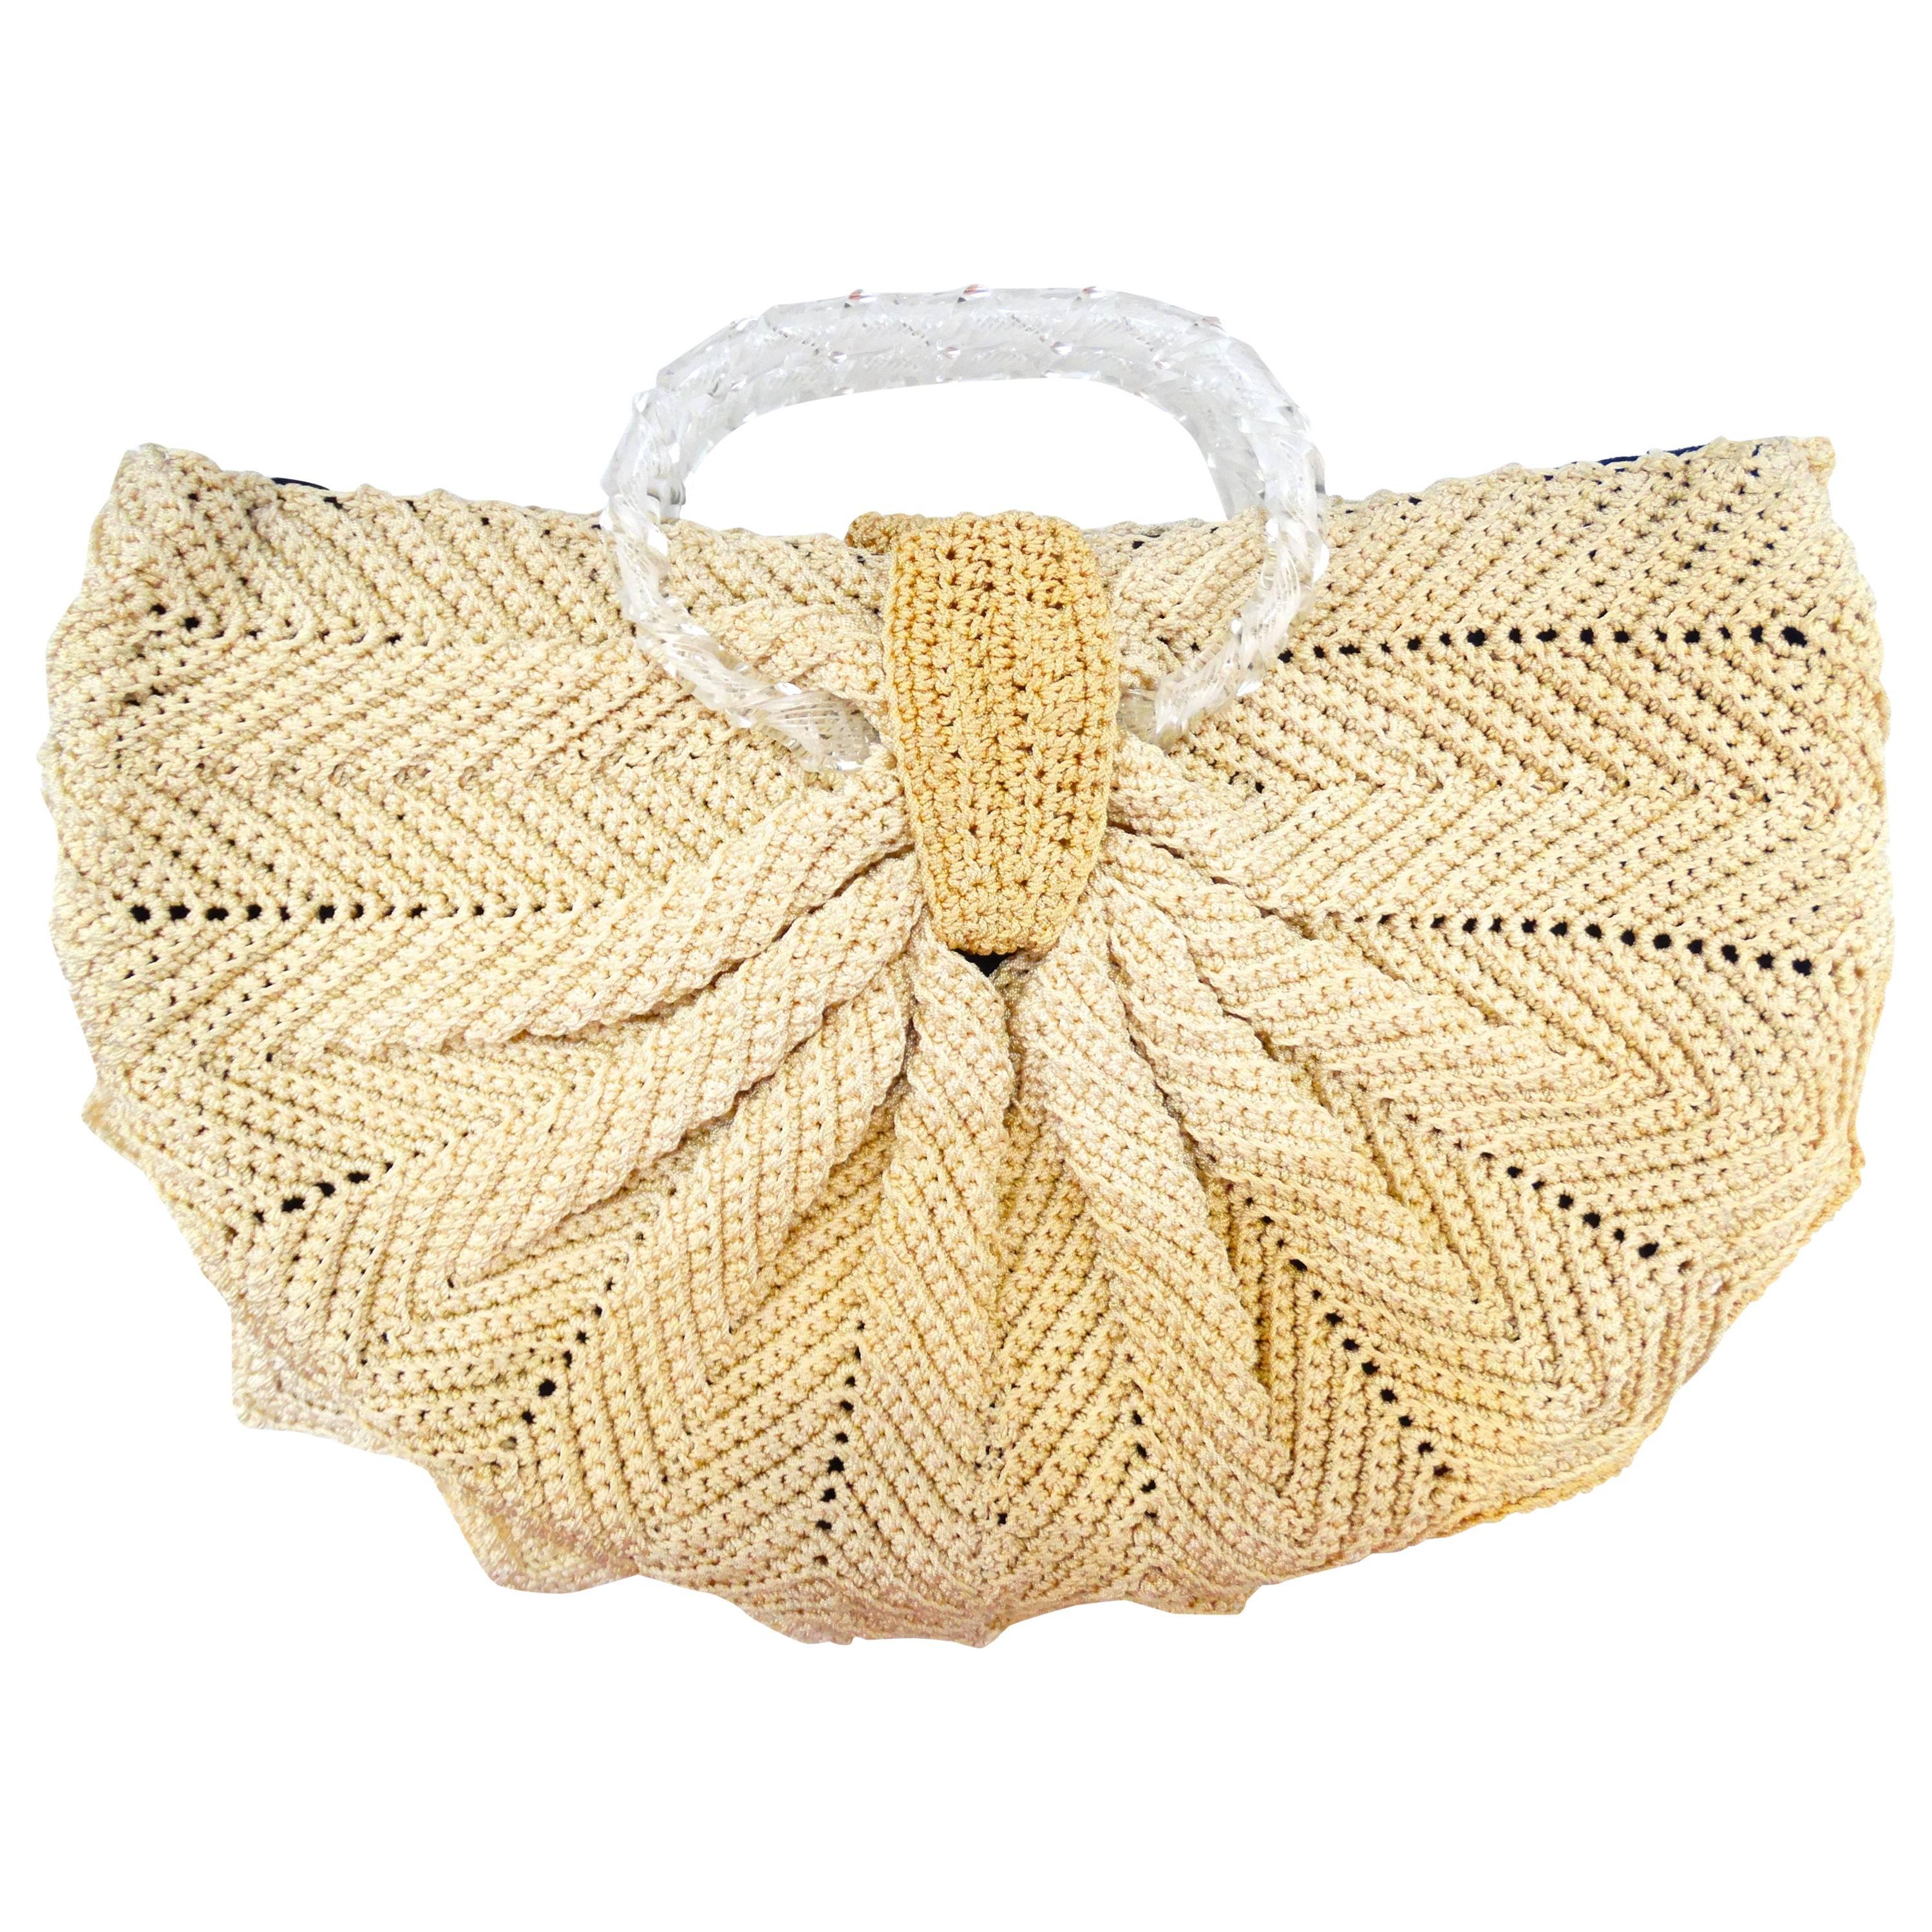 Wonderful 1970s Knitted Arc Bag With Lucite Handles